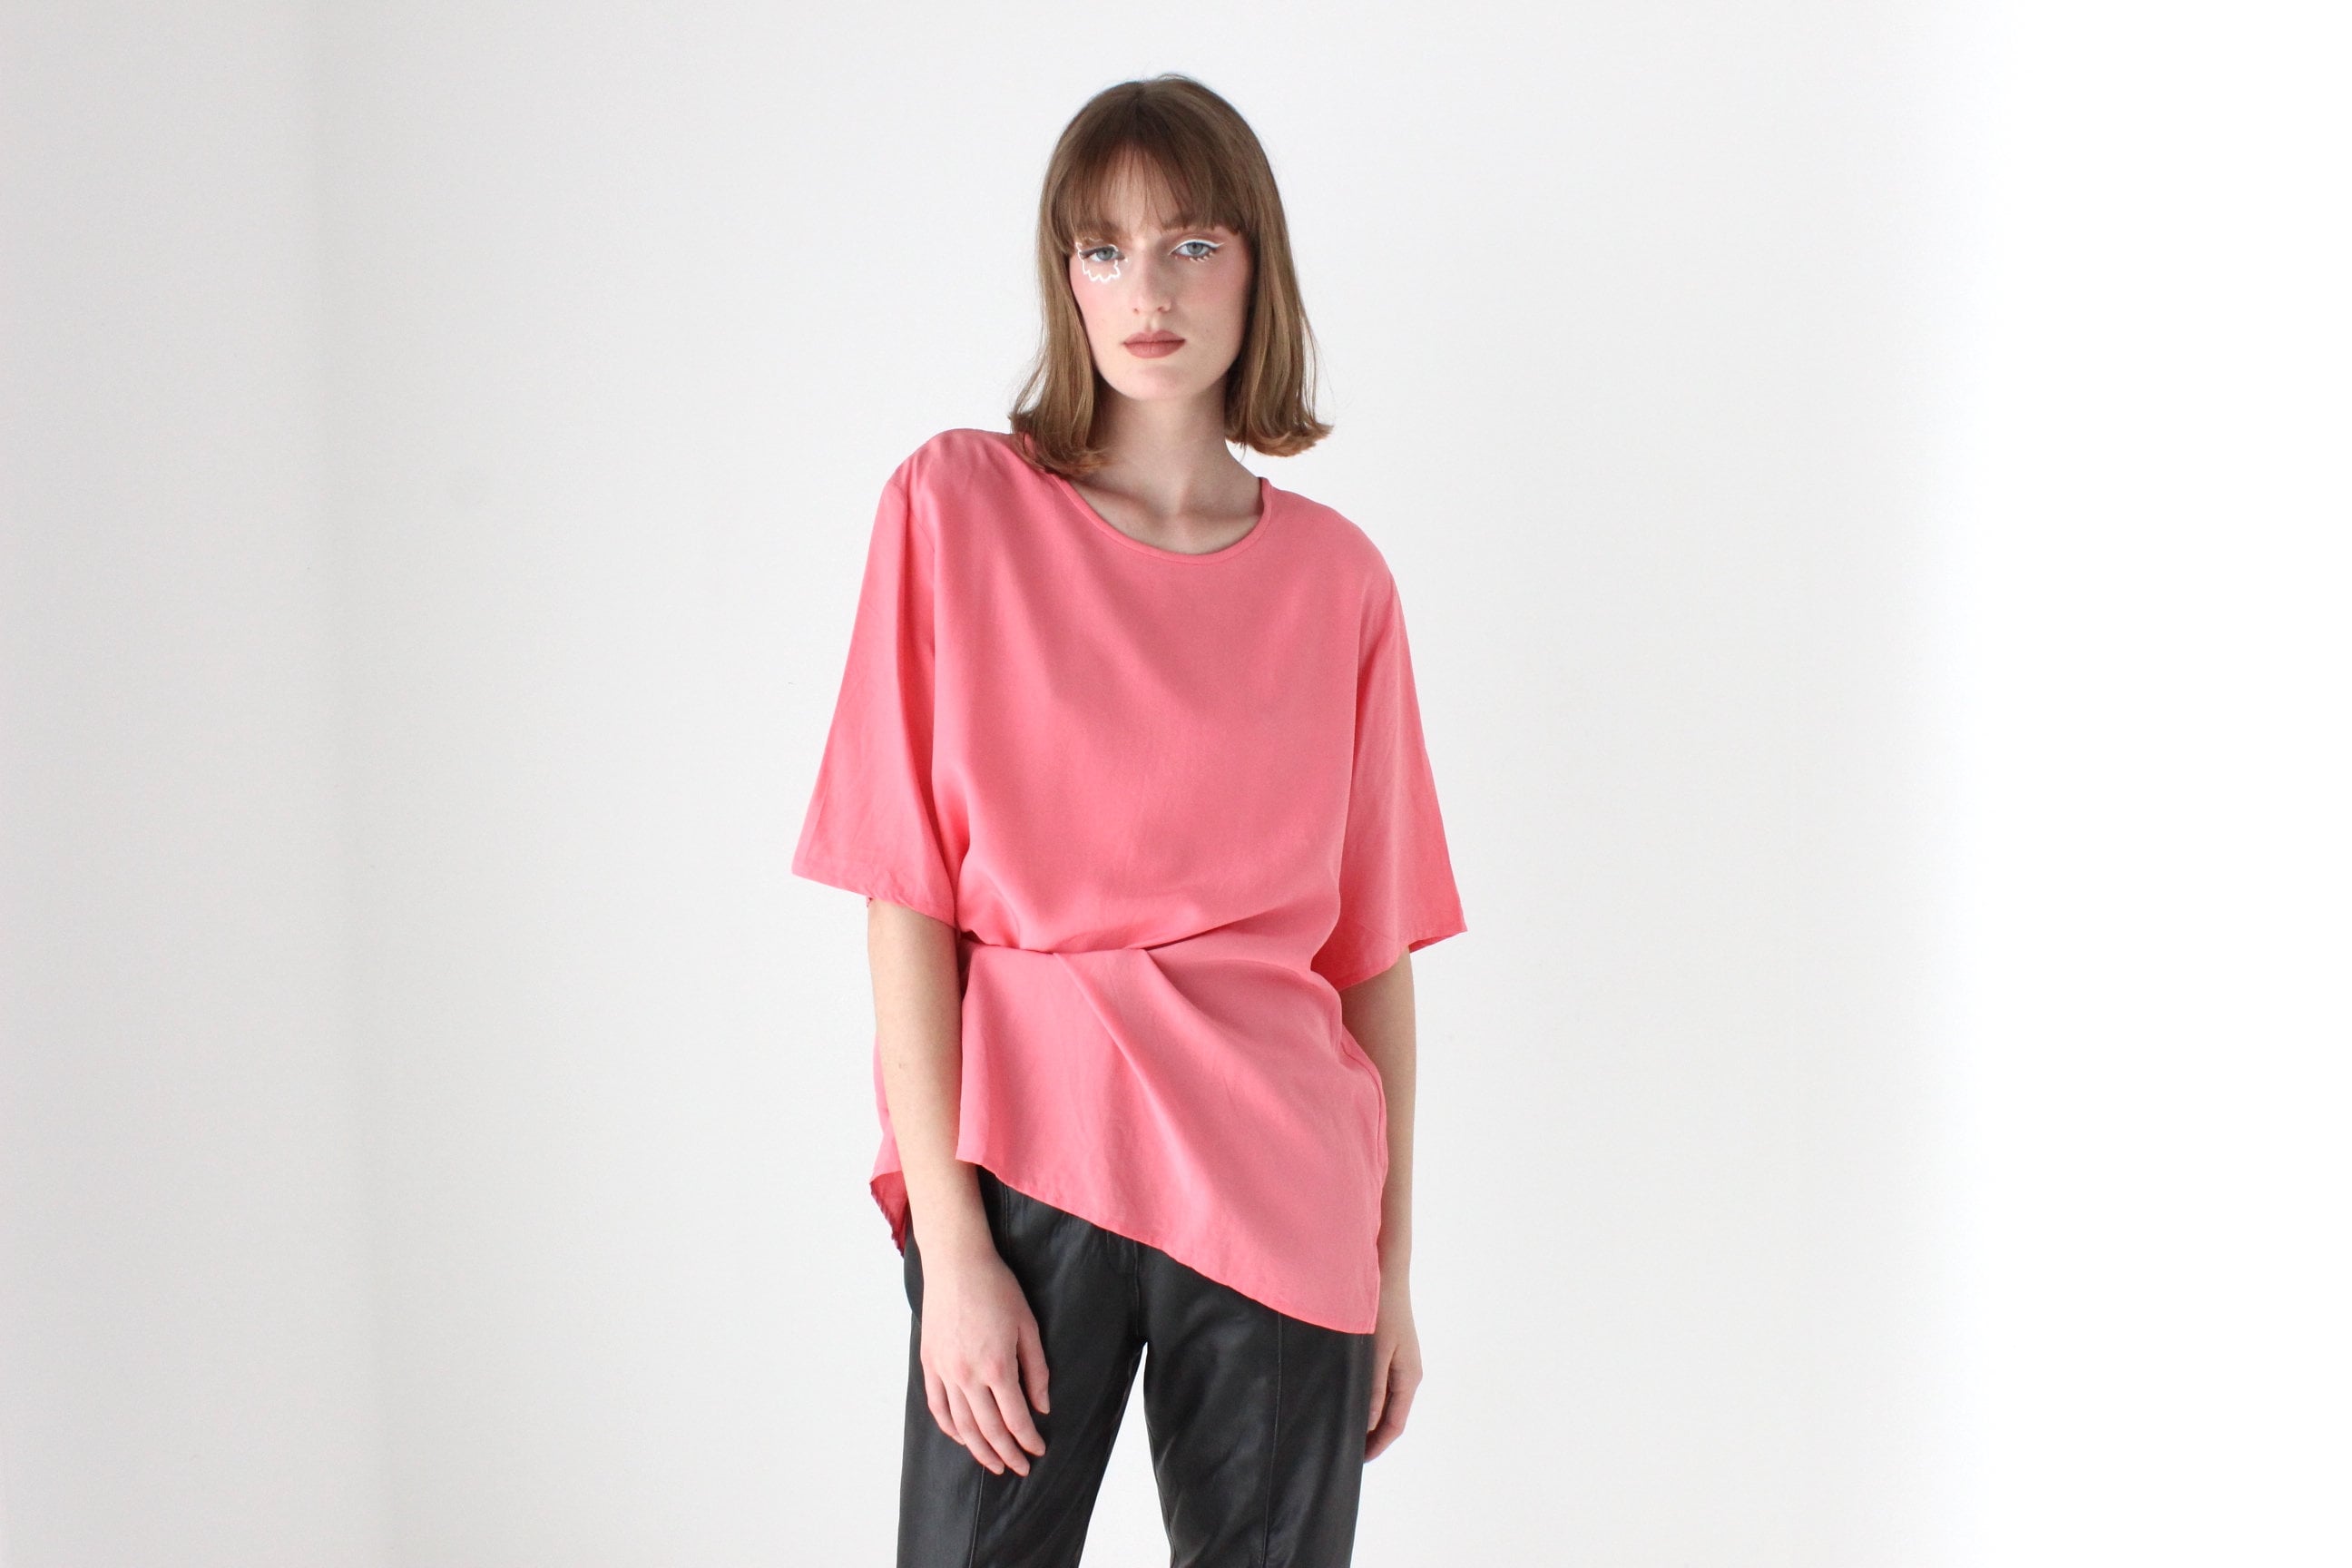 80s Bubblegum Pink Pure Silk Relaxed, Minimal Tee Top